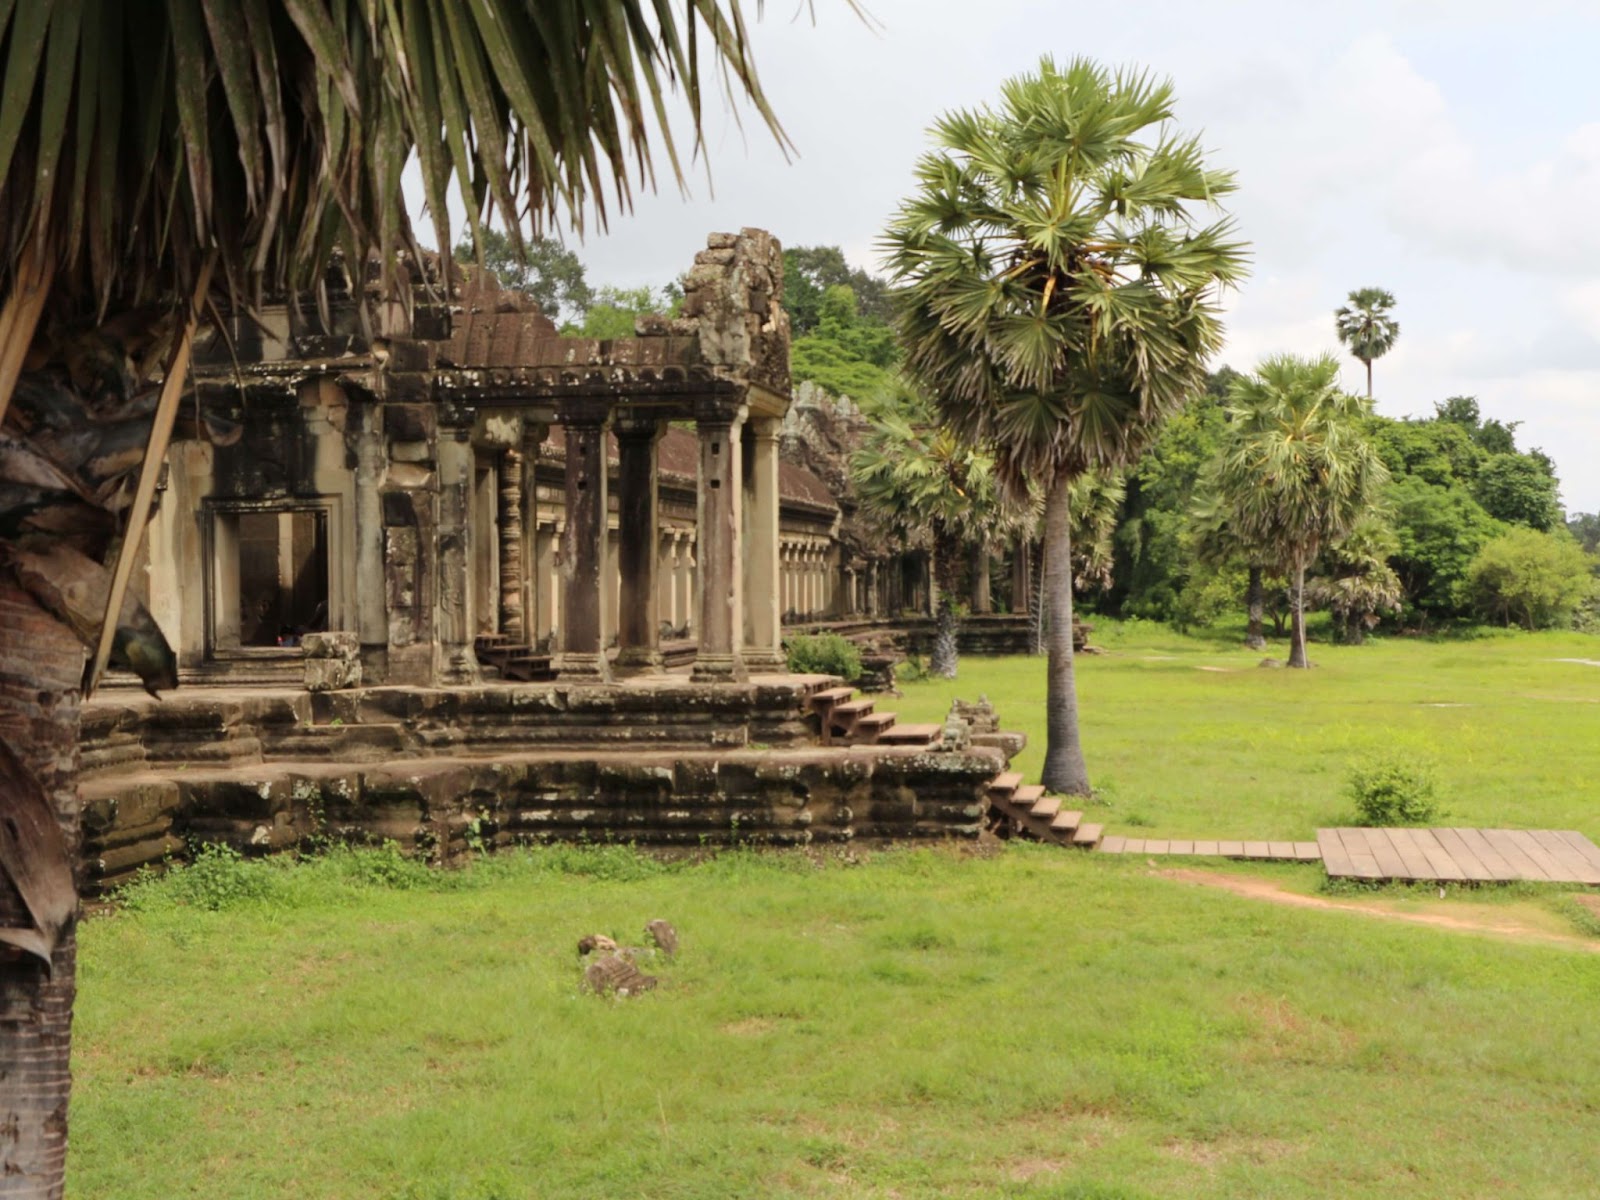 This is one of the other entrance to Angkor Wat. It was peaceful and calming and simply magical.